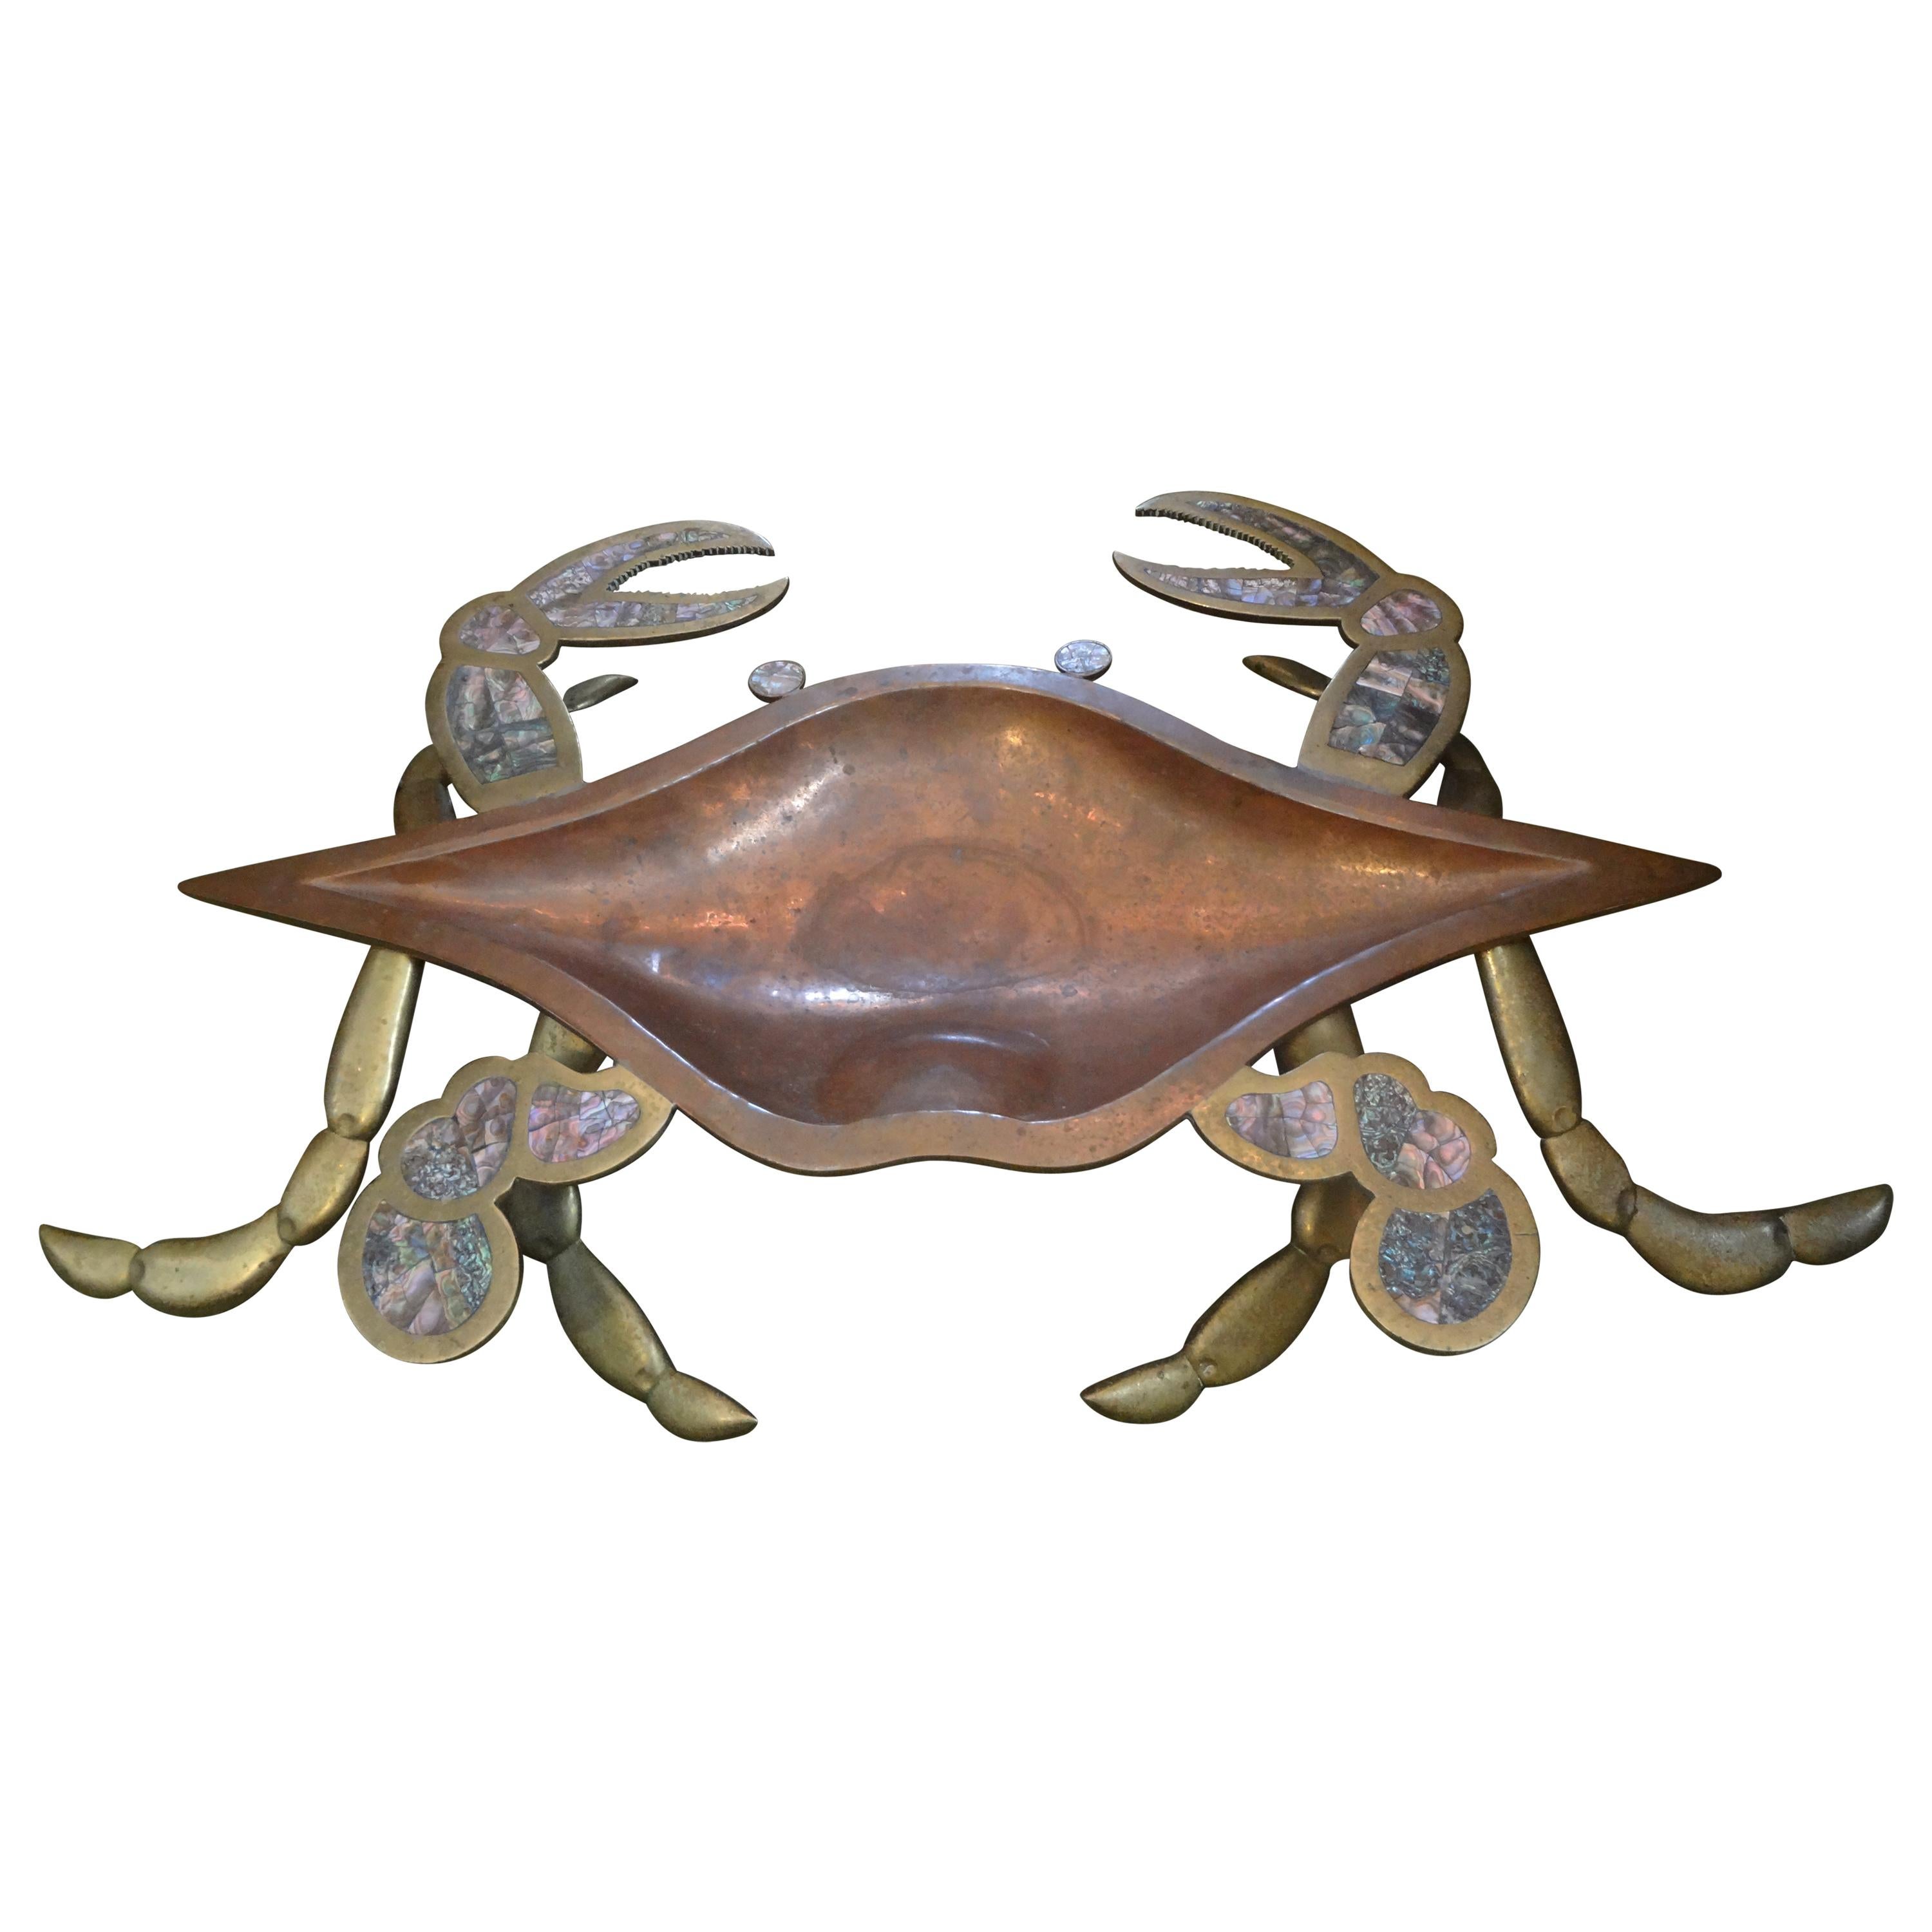 Monumental Mexican Modernist Brass and Copper Crab Dish Inlaid with Abalone